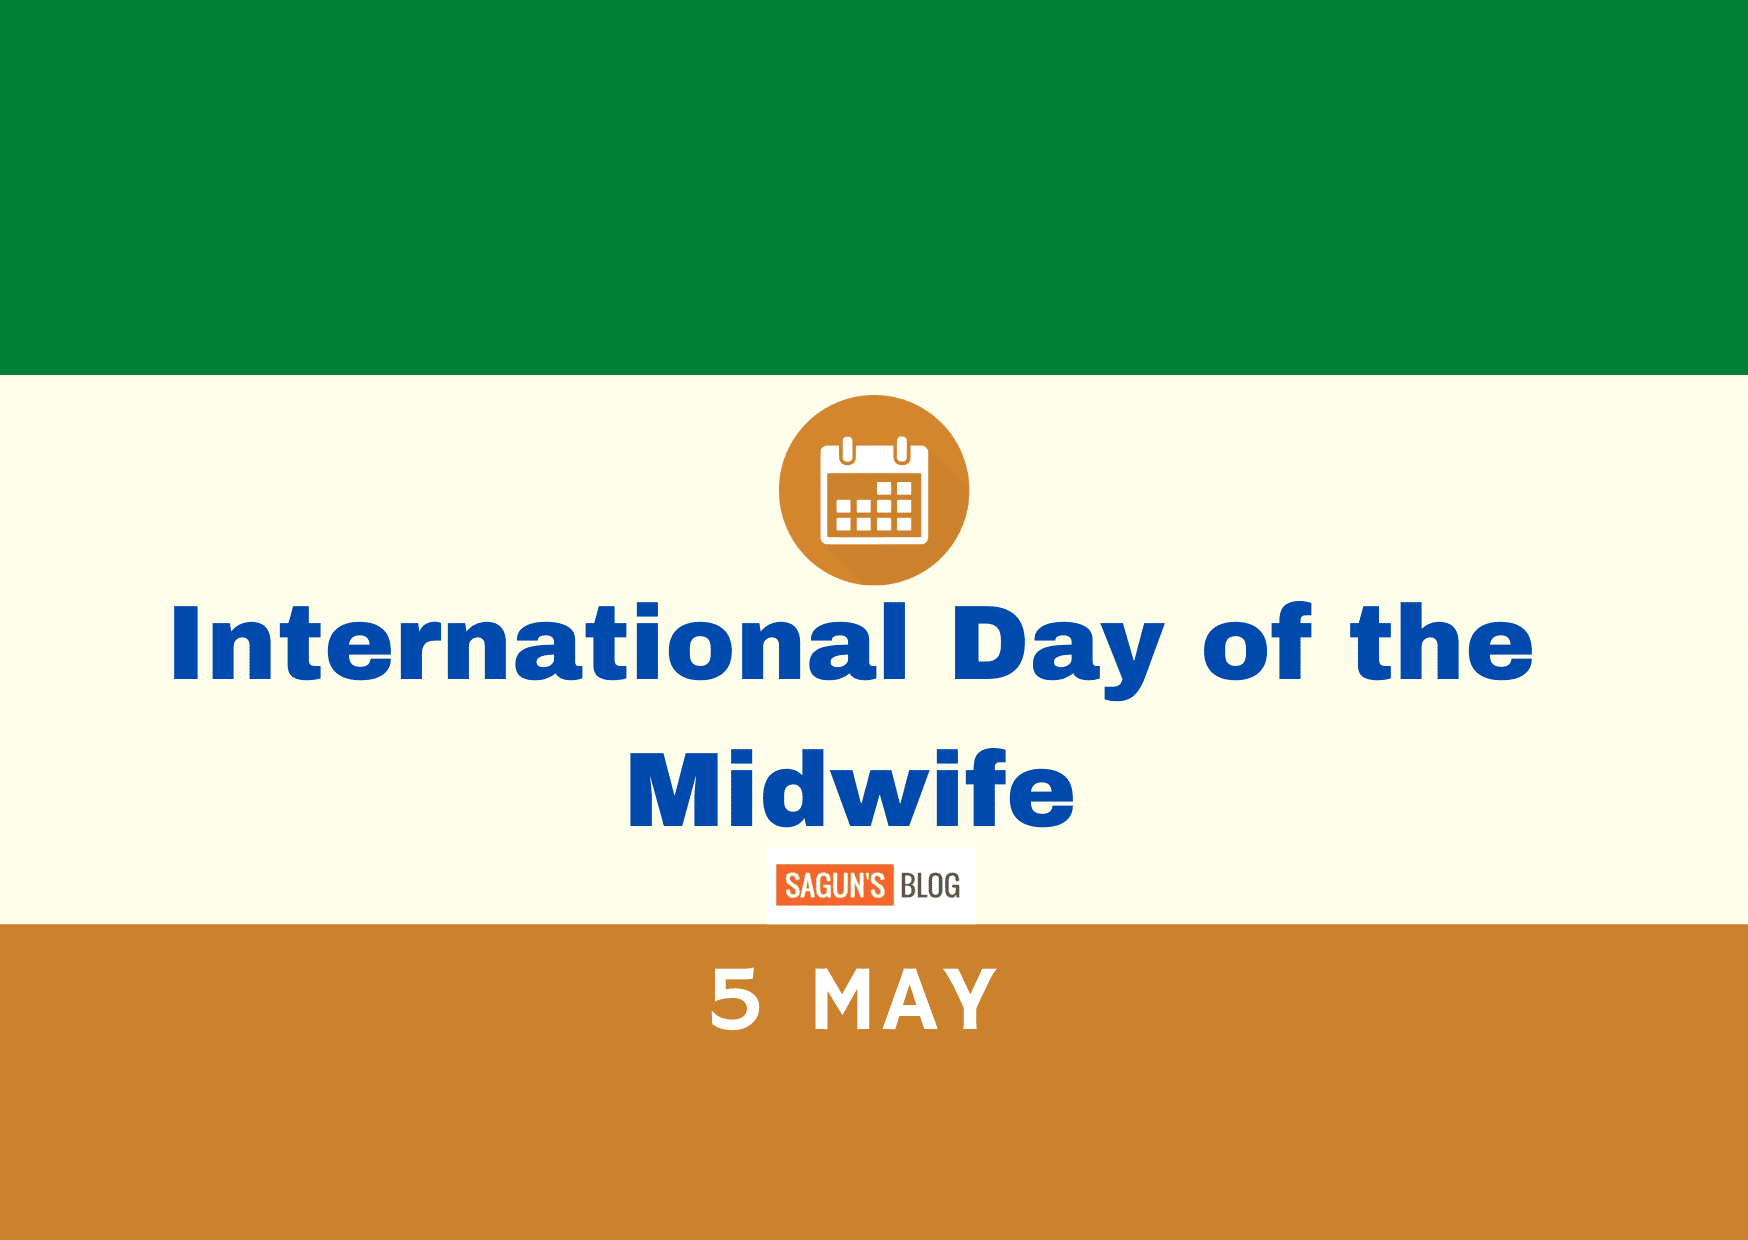 International Day of the Midwife